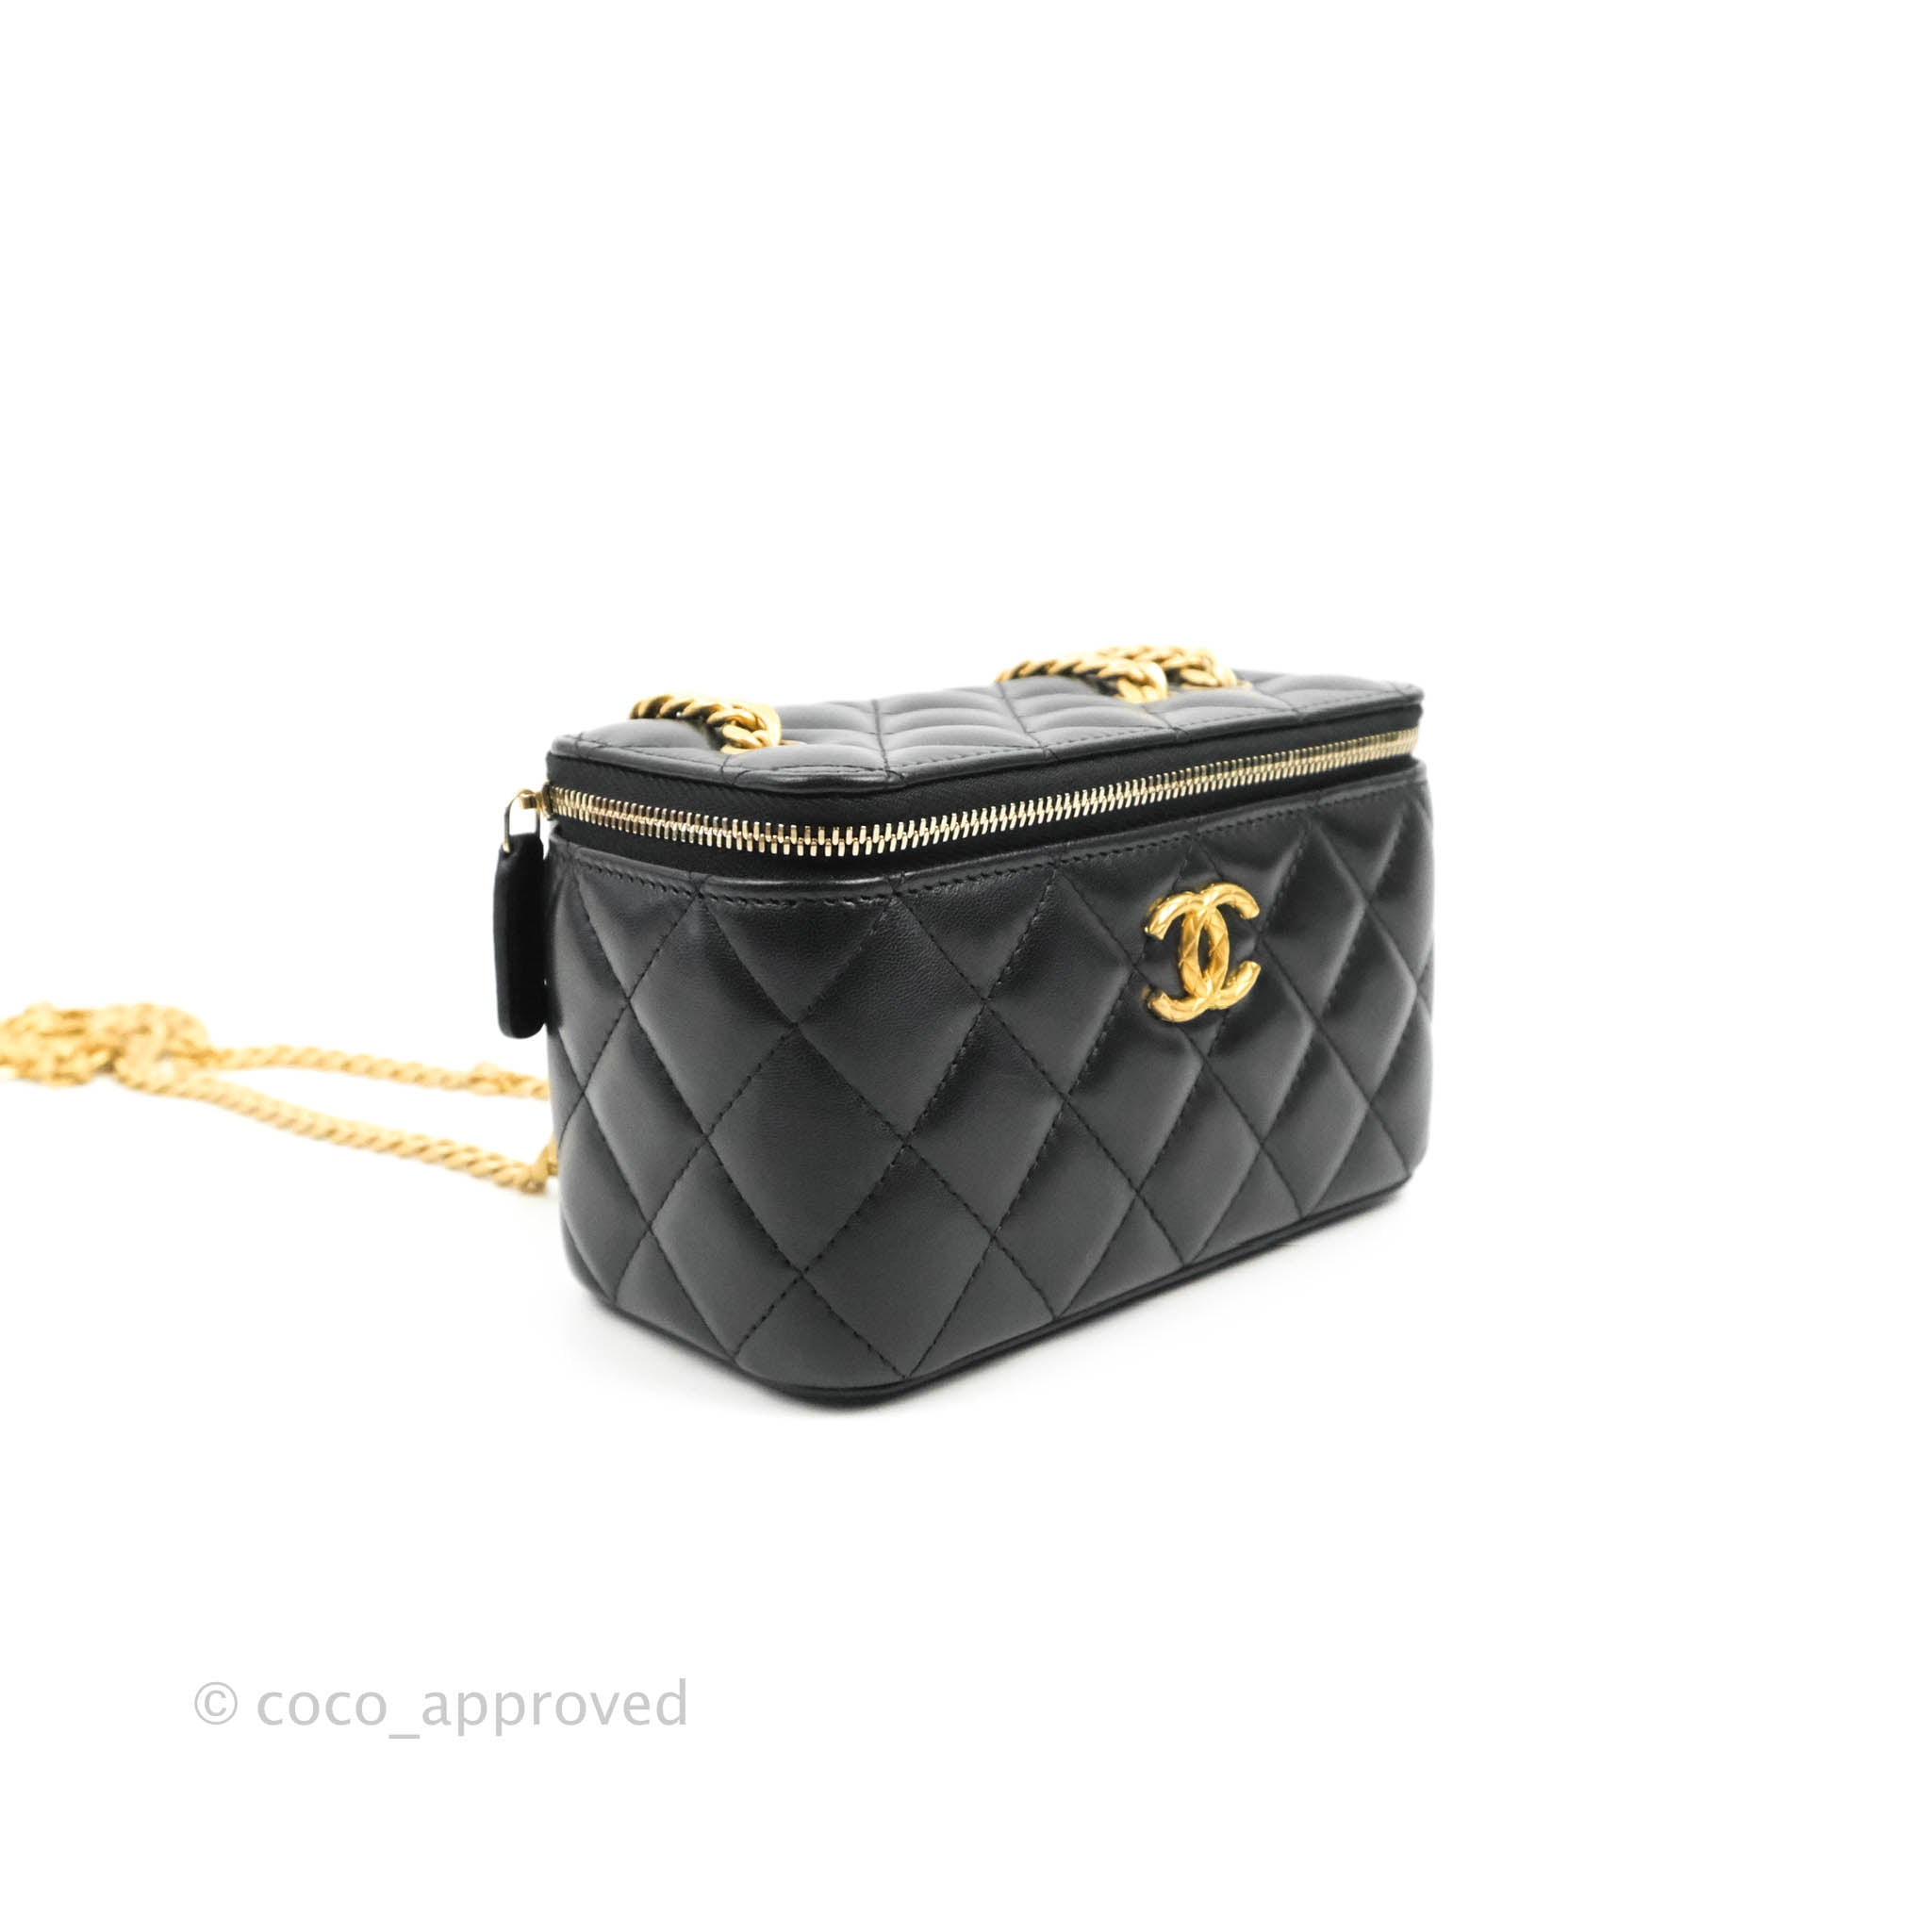 CHANEL 22 BAG BLACK and ECRU Tweed with Gold-Tone Hardware